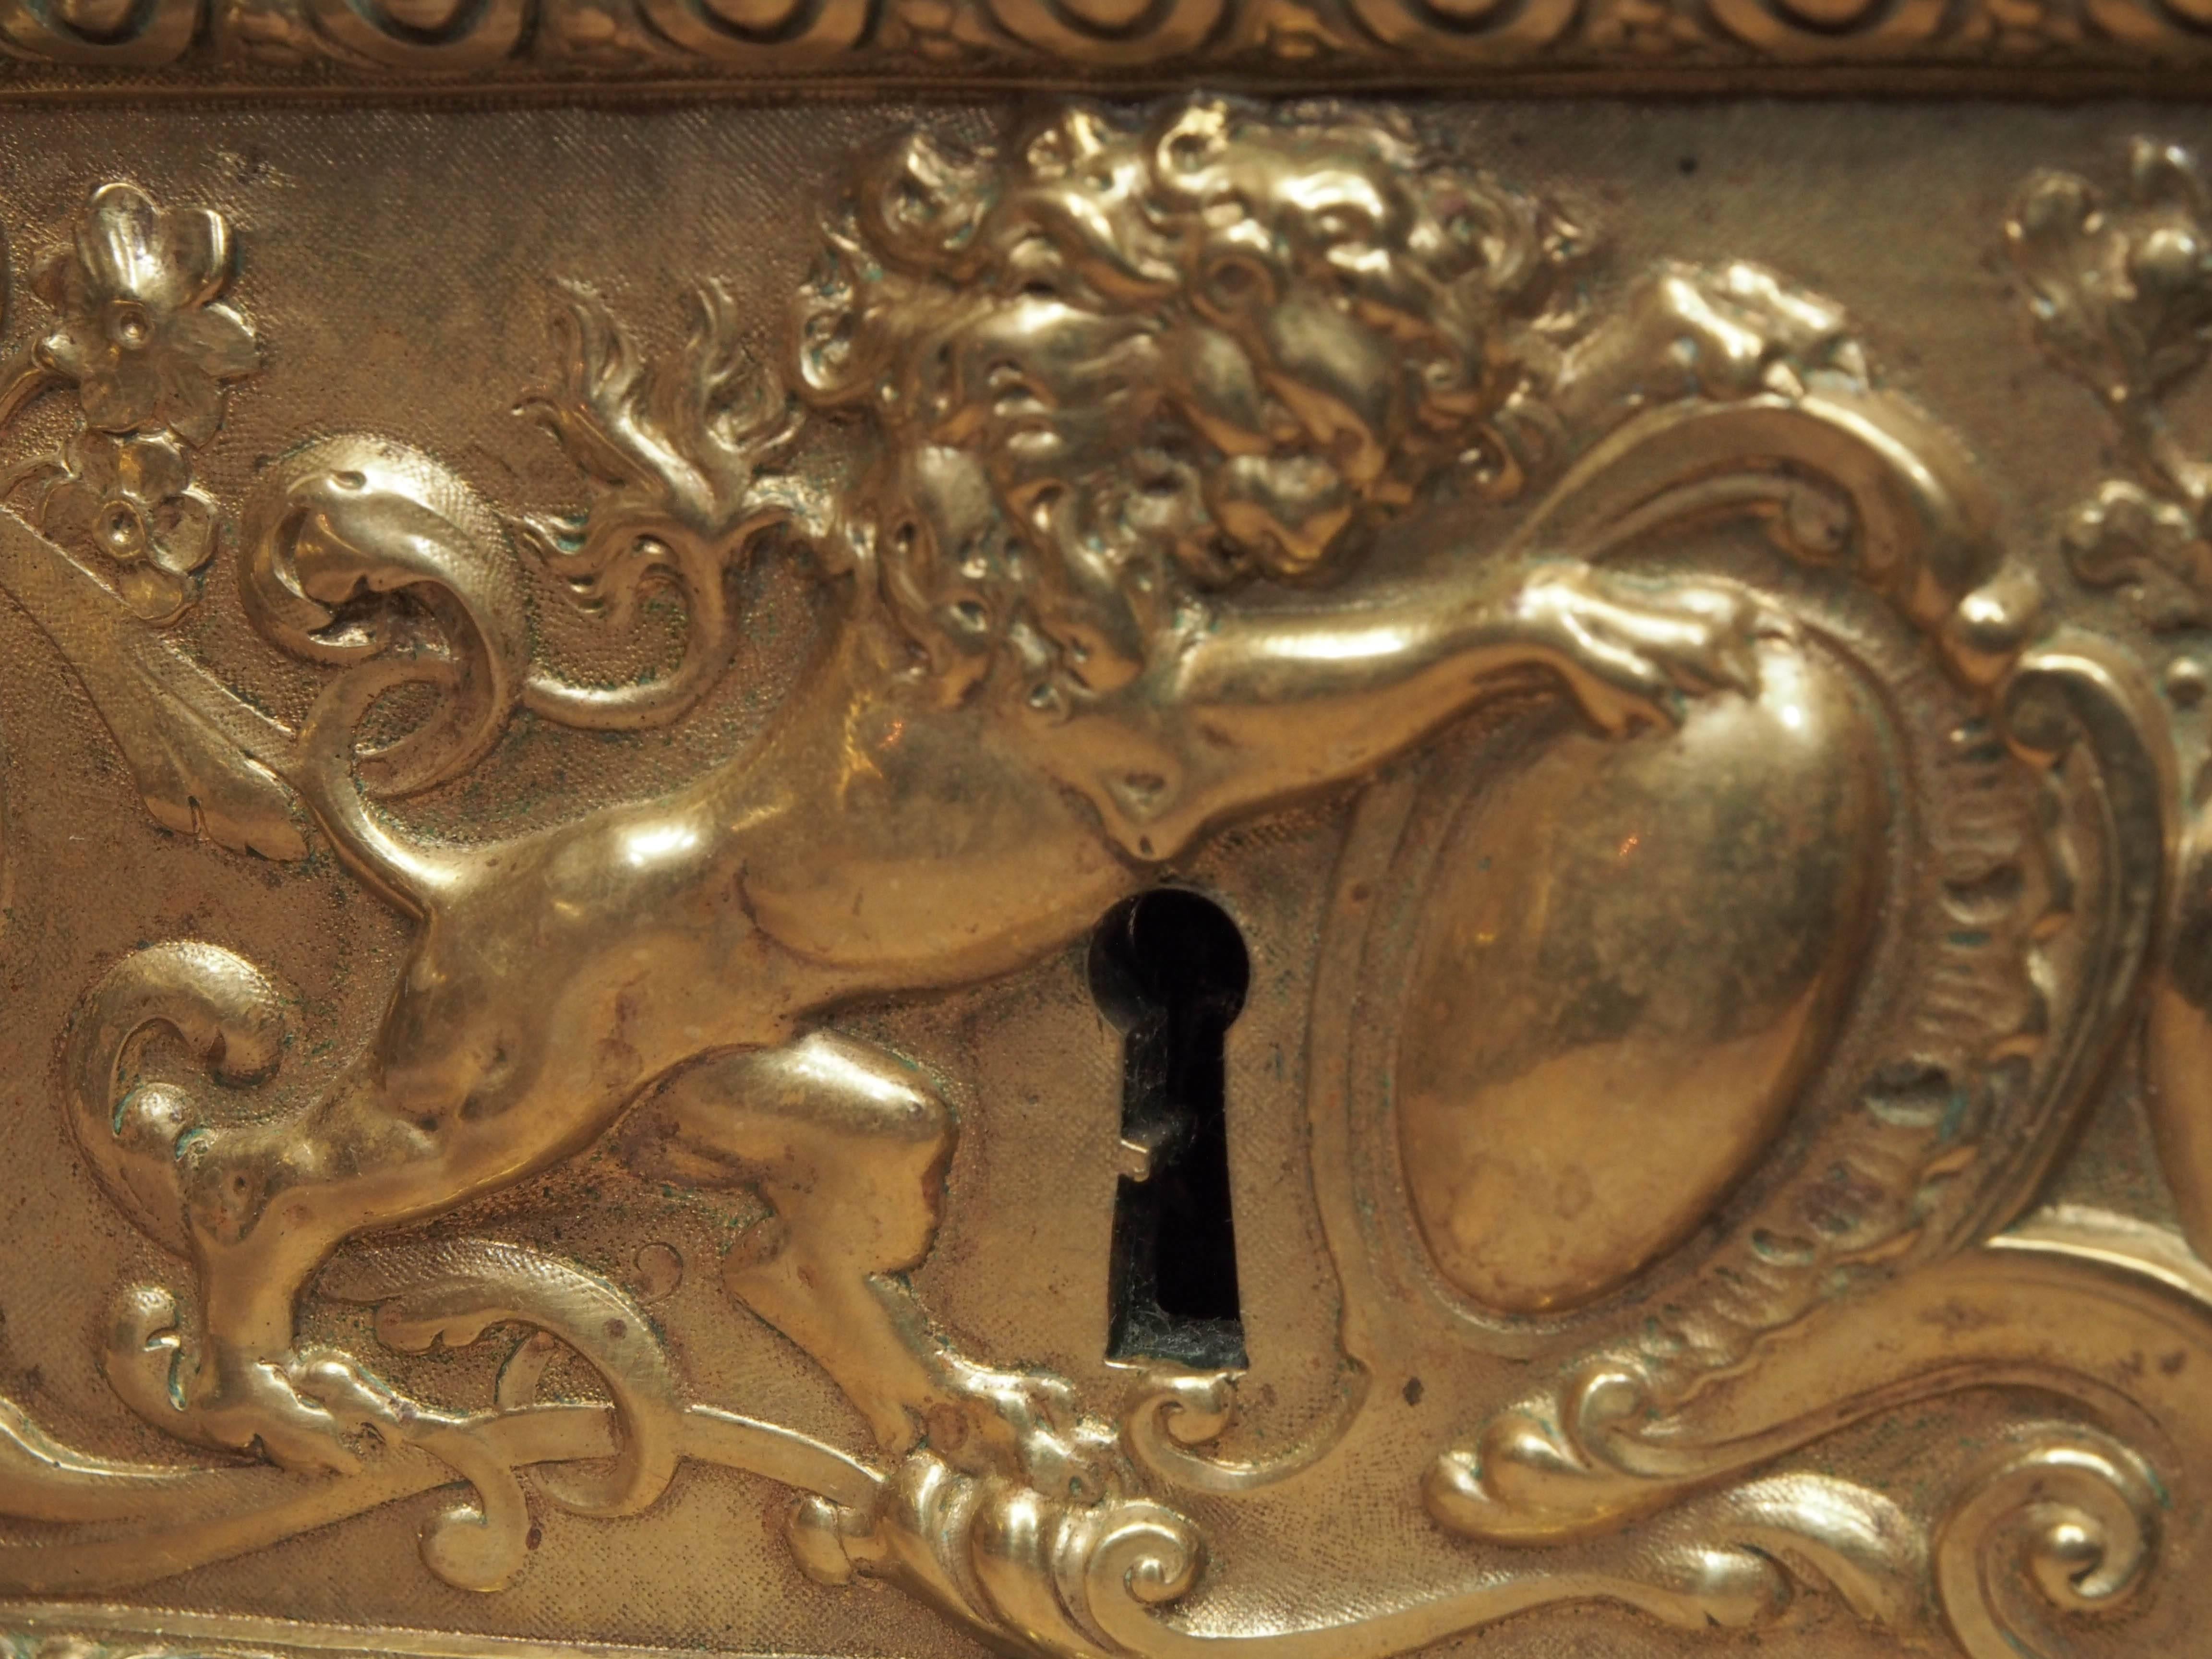 18th century French cast bronze door lock with and "egg and dart" borders, lion and double knobs, circa 1780.